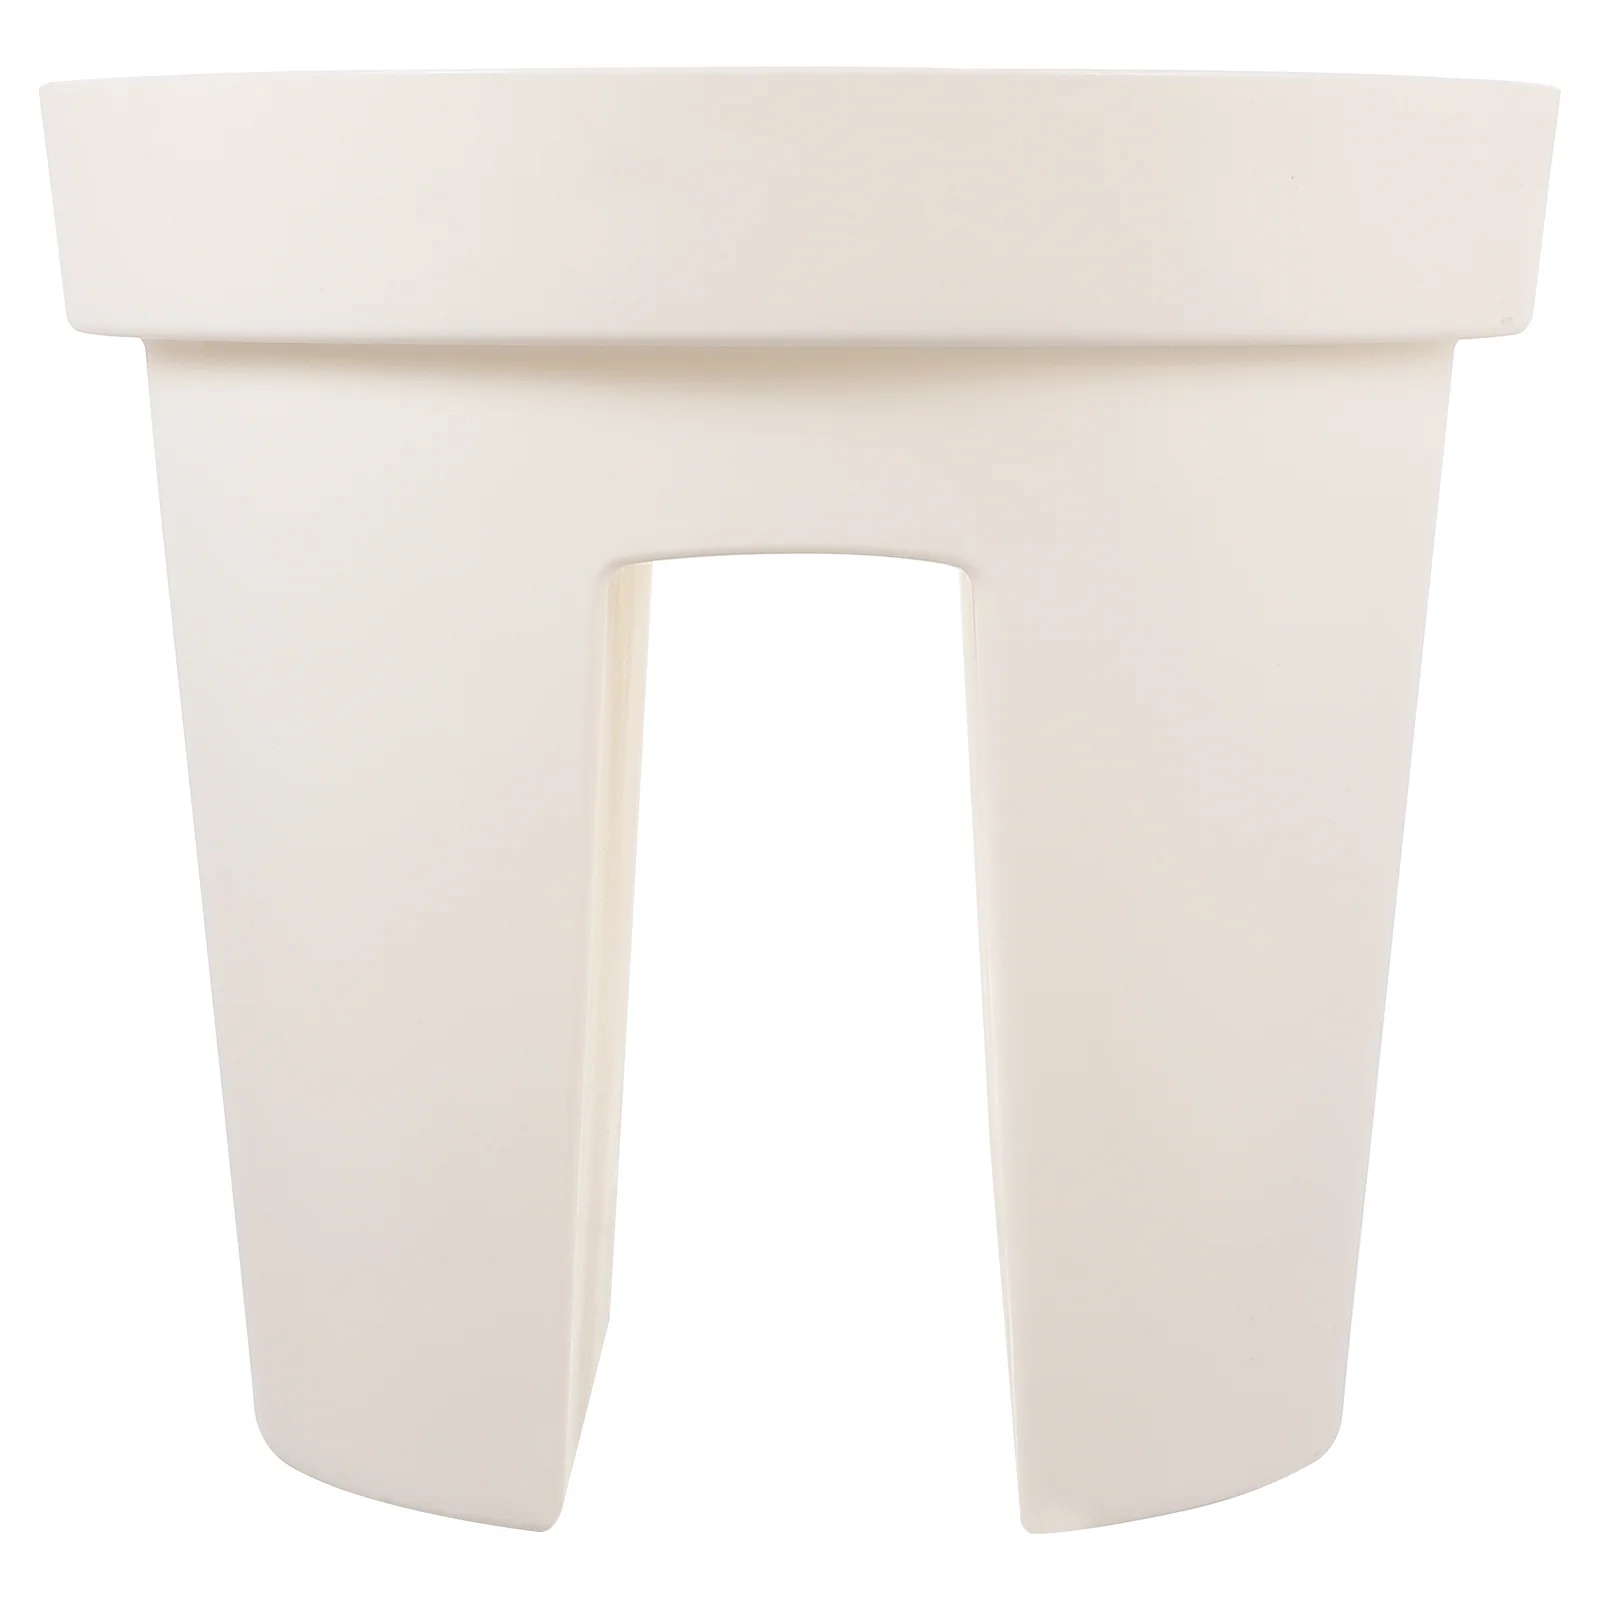 1pc Plastic Thickened Flowerpot Plastic Creative Flowerpot Container for Balcony Garden Fence Use